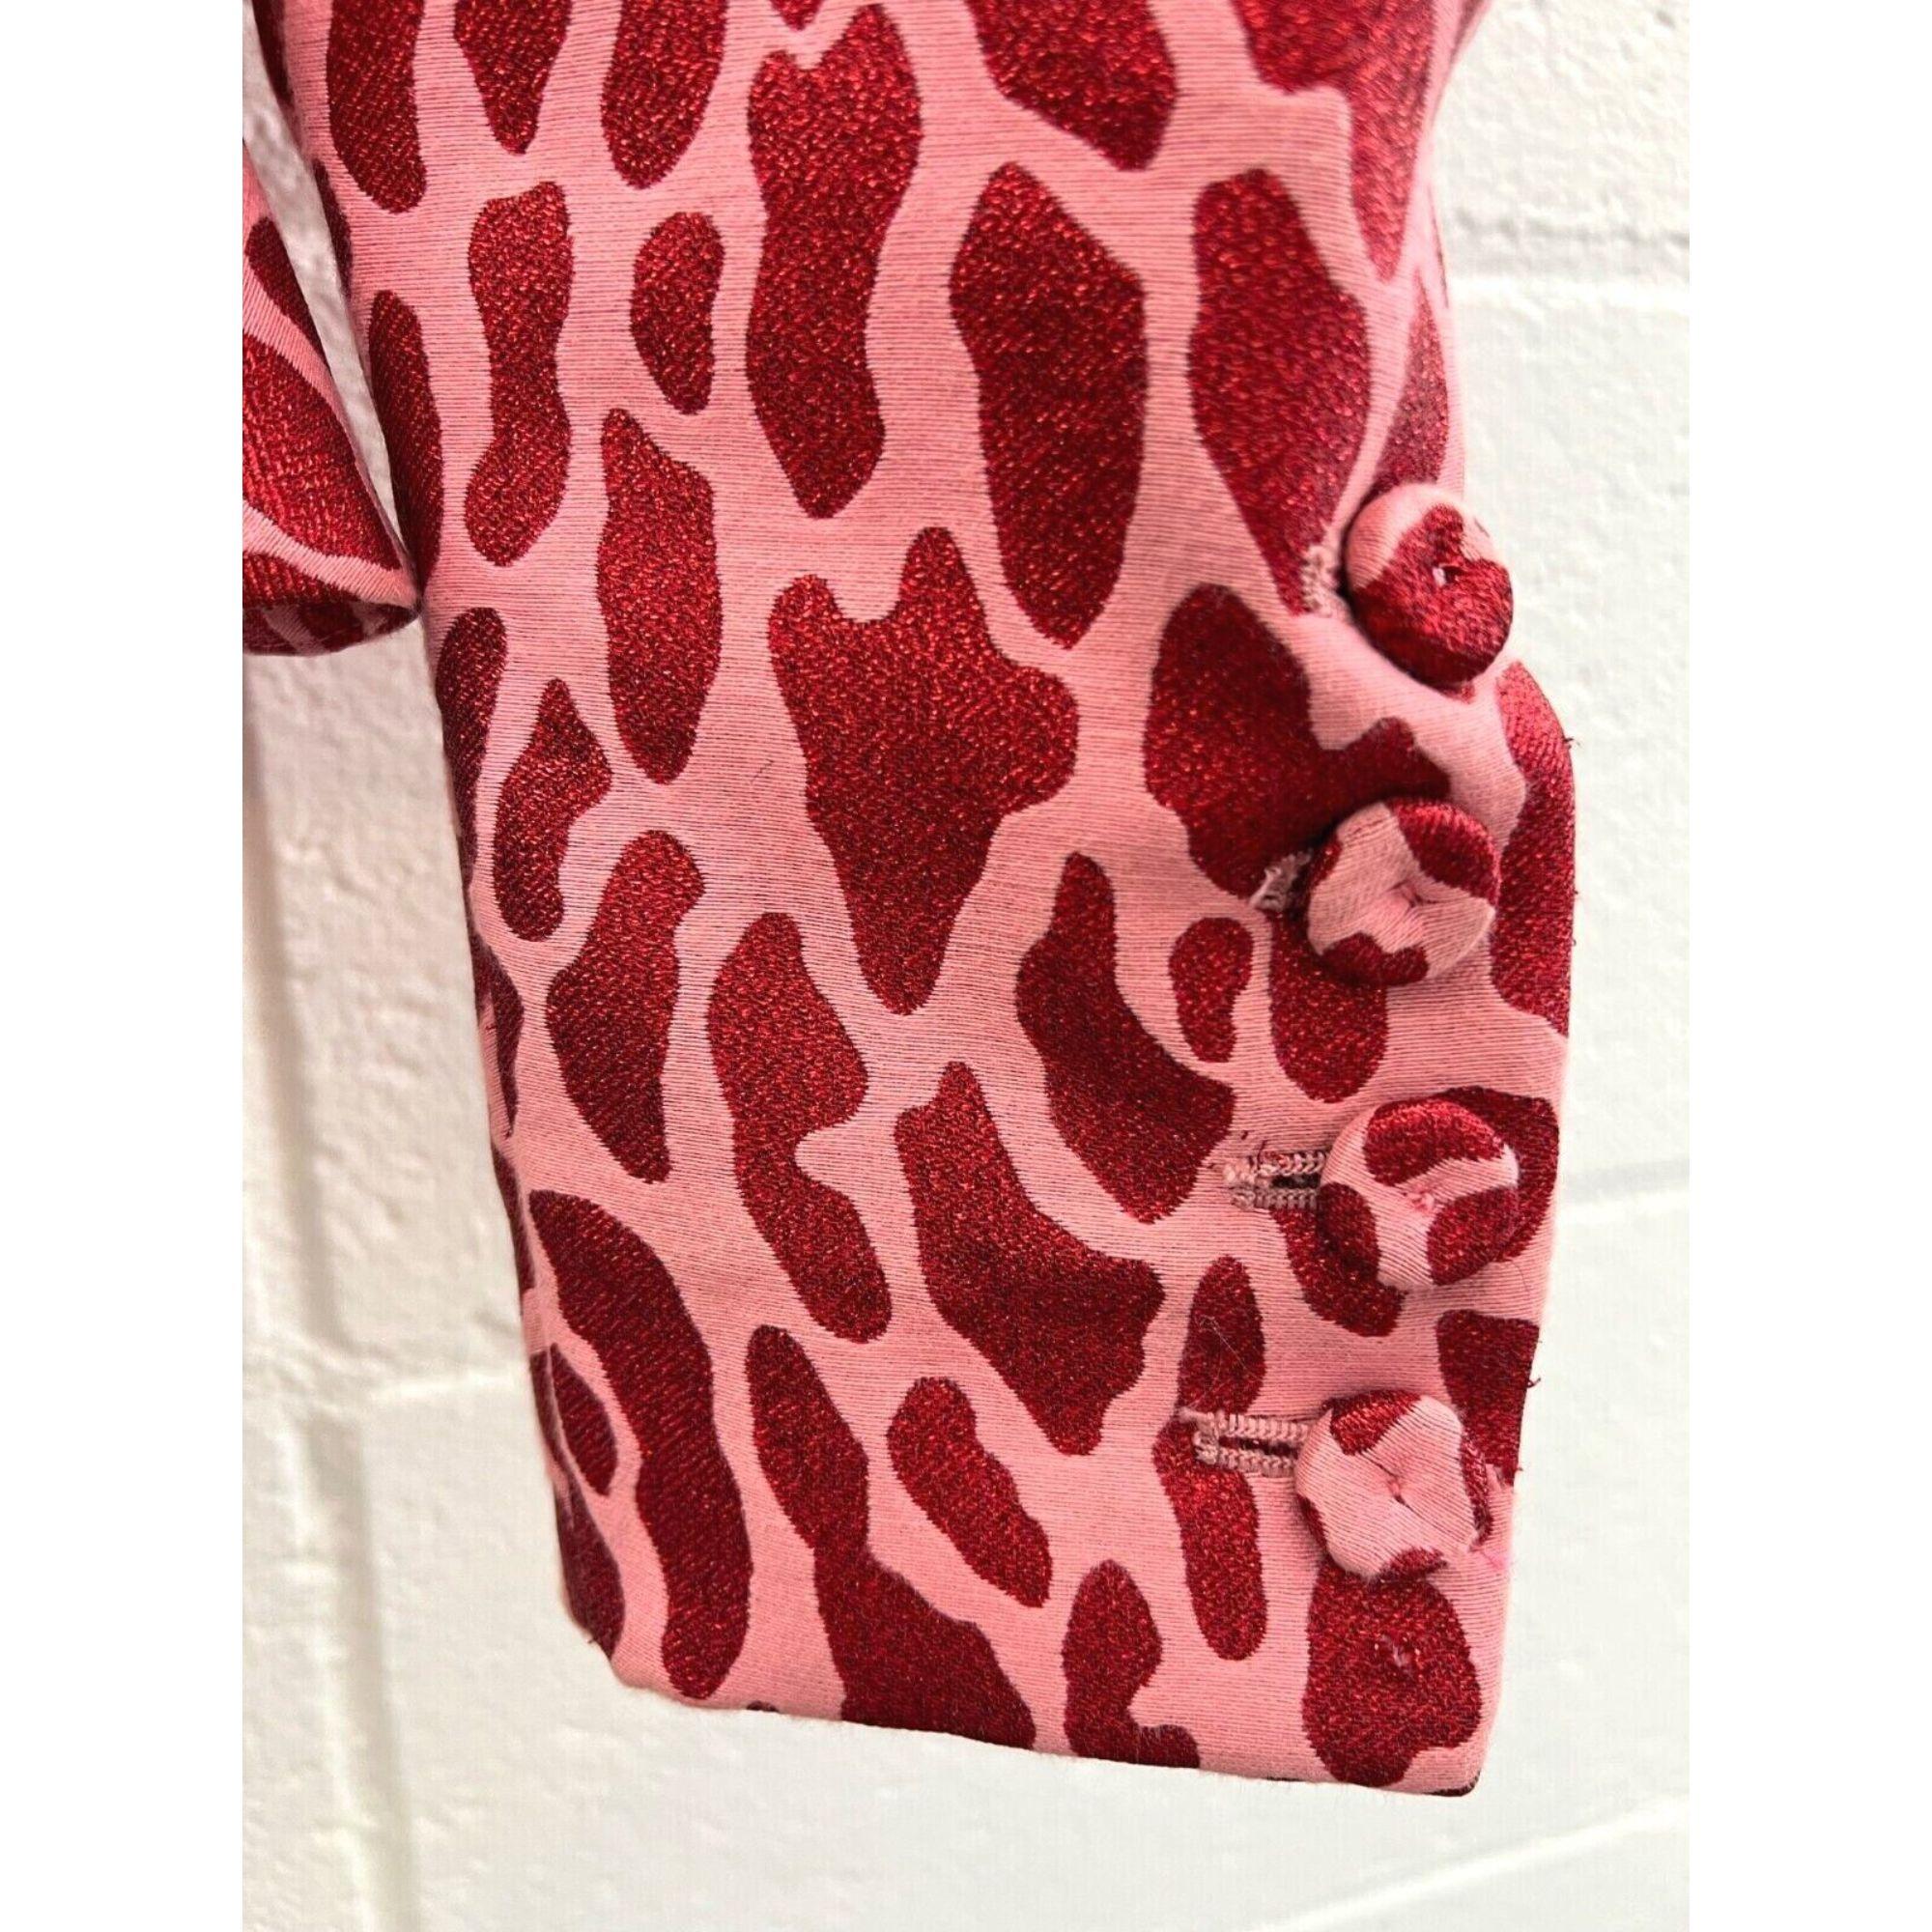 AW21 Moschino Couture Jacket Half Black Half Pink Leopard Spots by Jeremy Scott In New Condition For Sale In Palm Springs, CA